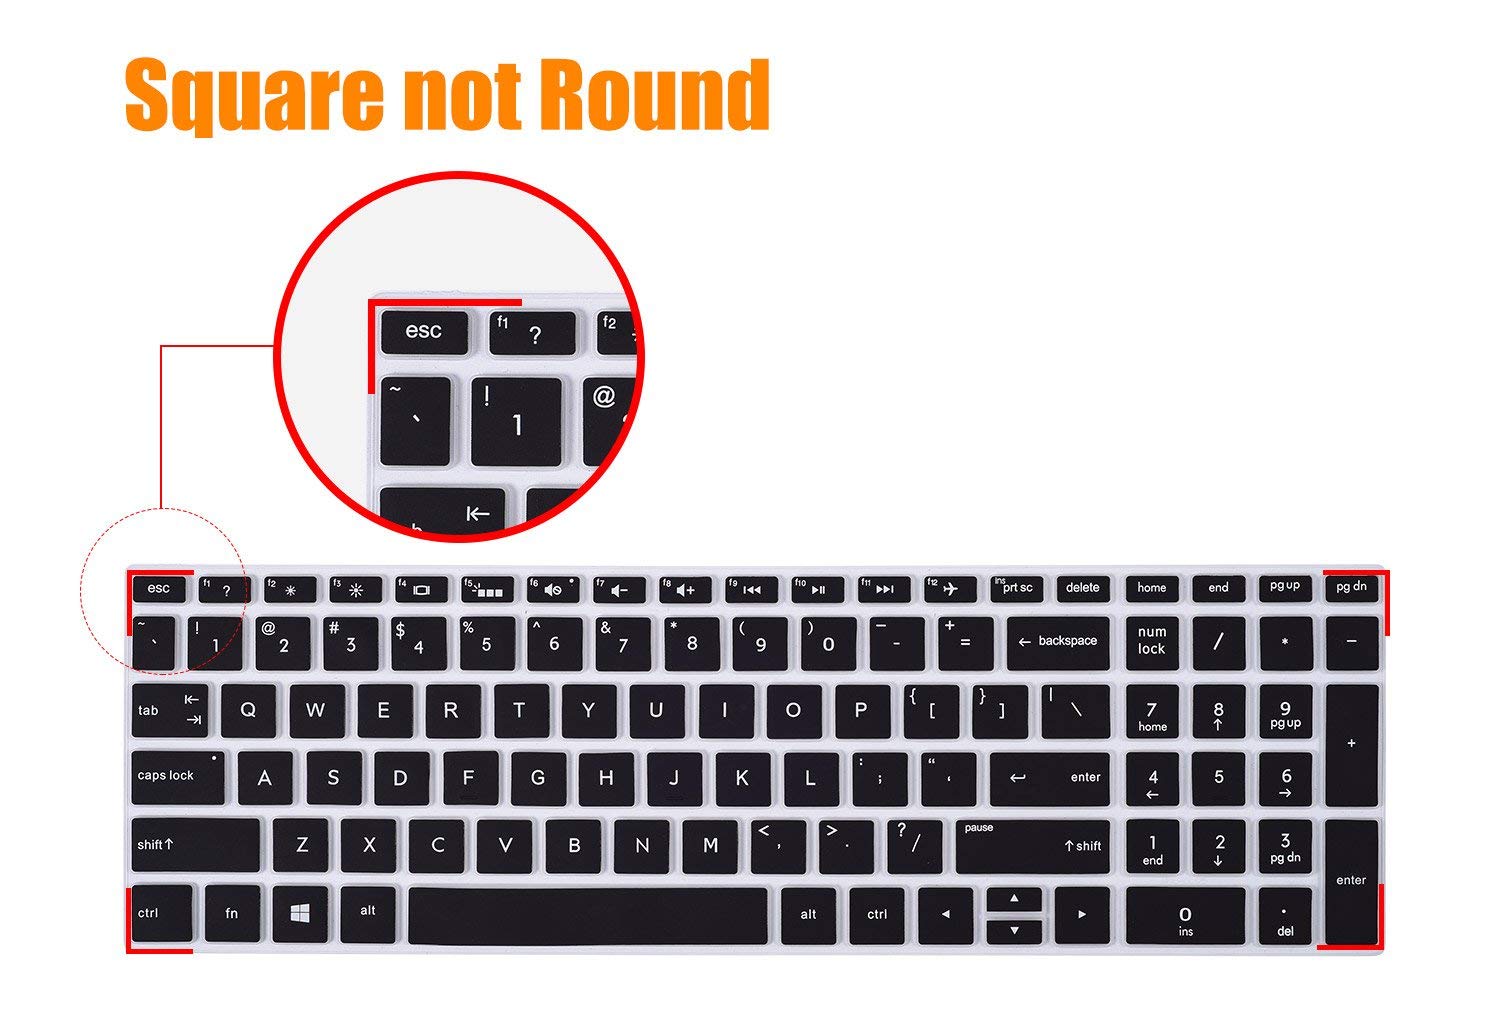 Silicone Keyboard Skin Cover for Hp Envy 17t 17-Bw0011nr 17M-Ae011dx 17M-Ae111dx 17M-Bw0013dx 17 inch Laptop (Black)